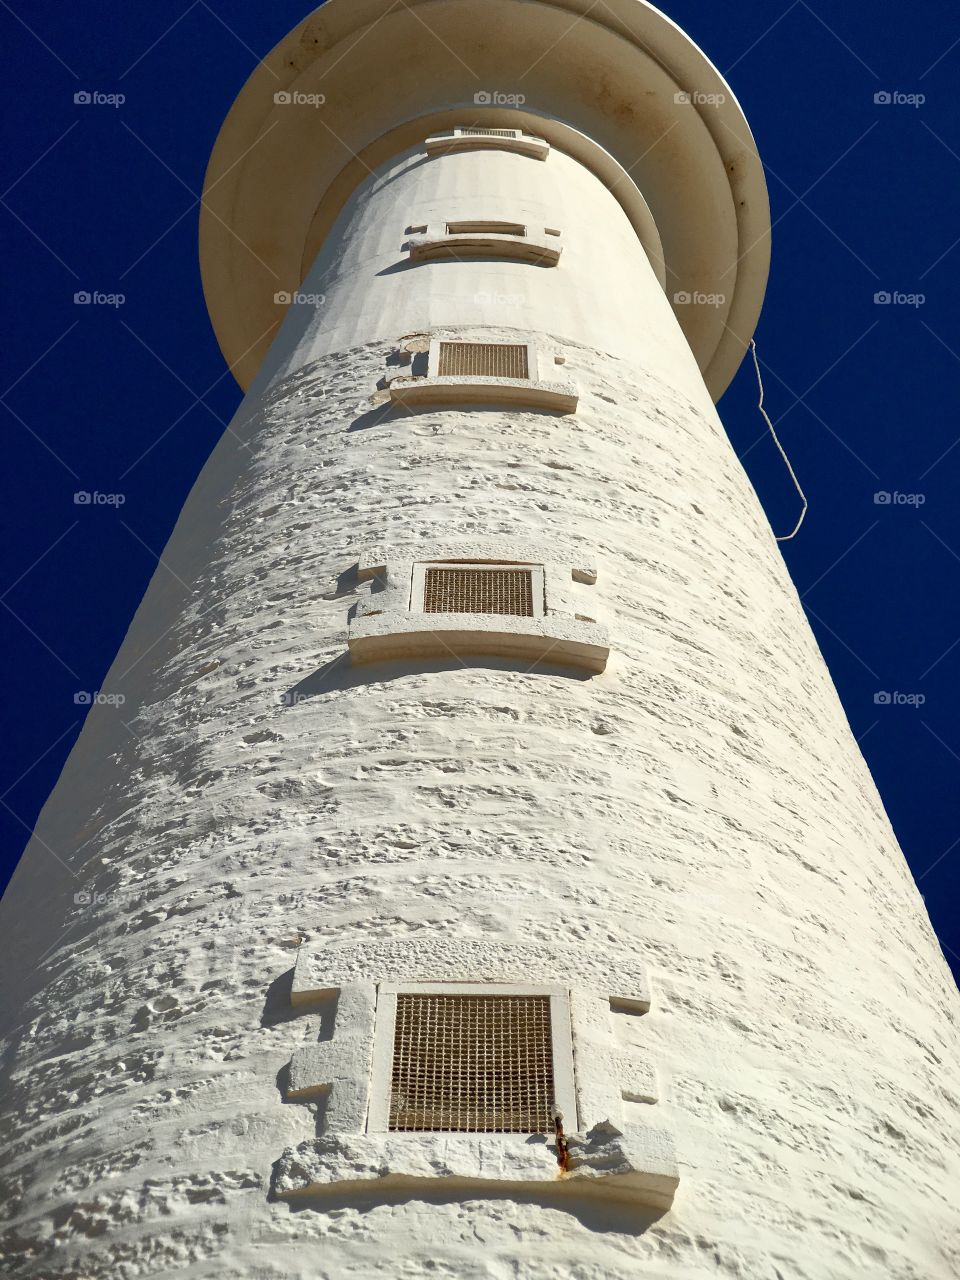 From the ground up perspective:  Point Lowly Lighthouse, Whyalla, South Australia 